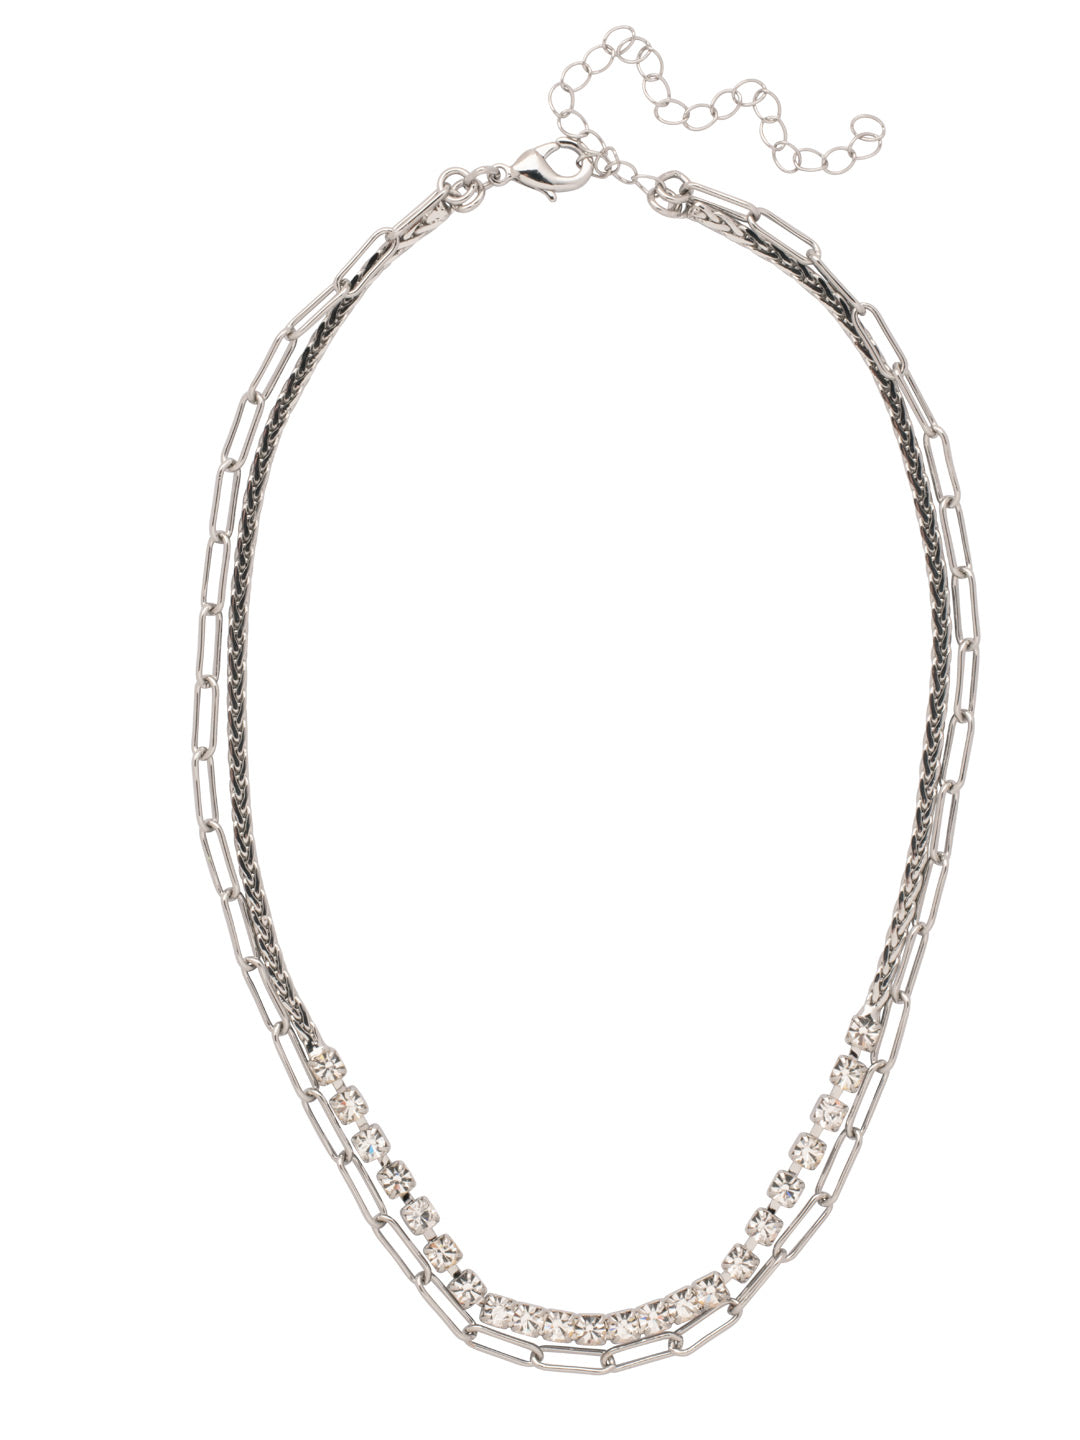 Crystal and Paperclip Chain Layered Necklace - 4NFJ8PDCRY - <p>The Crystal and Paperclip Chain Layered Necklace features a crystal embellished rope chain and a paperclip chain layered together with an extension chain, secured with a lobster claw clasp. From Sorrelli's Crystal collection in our Palladium finish.</p>